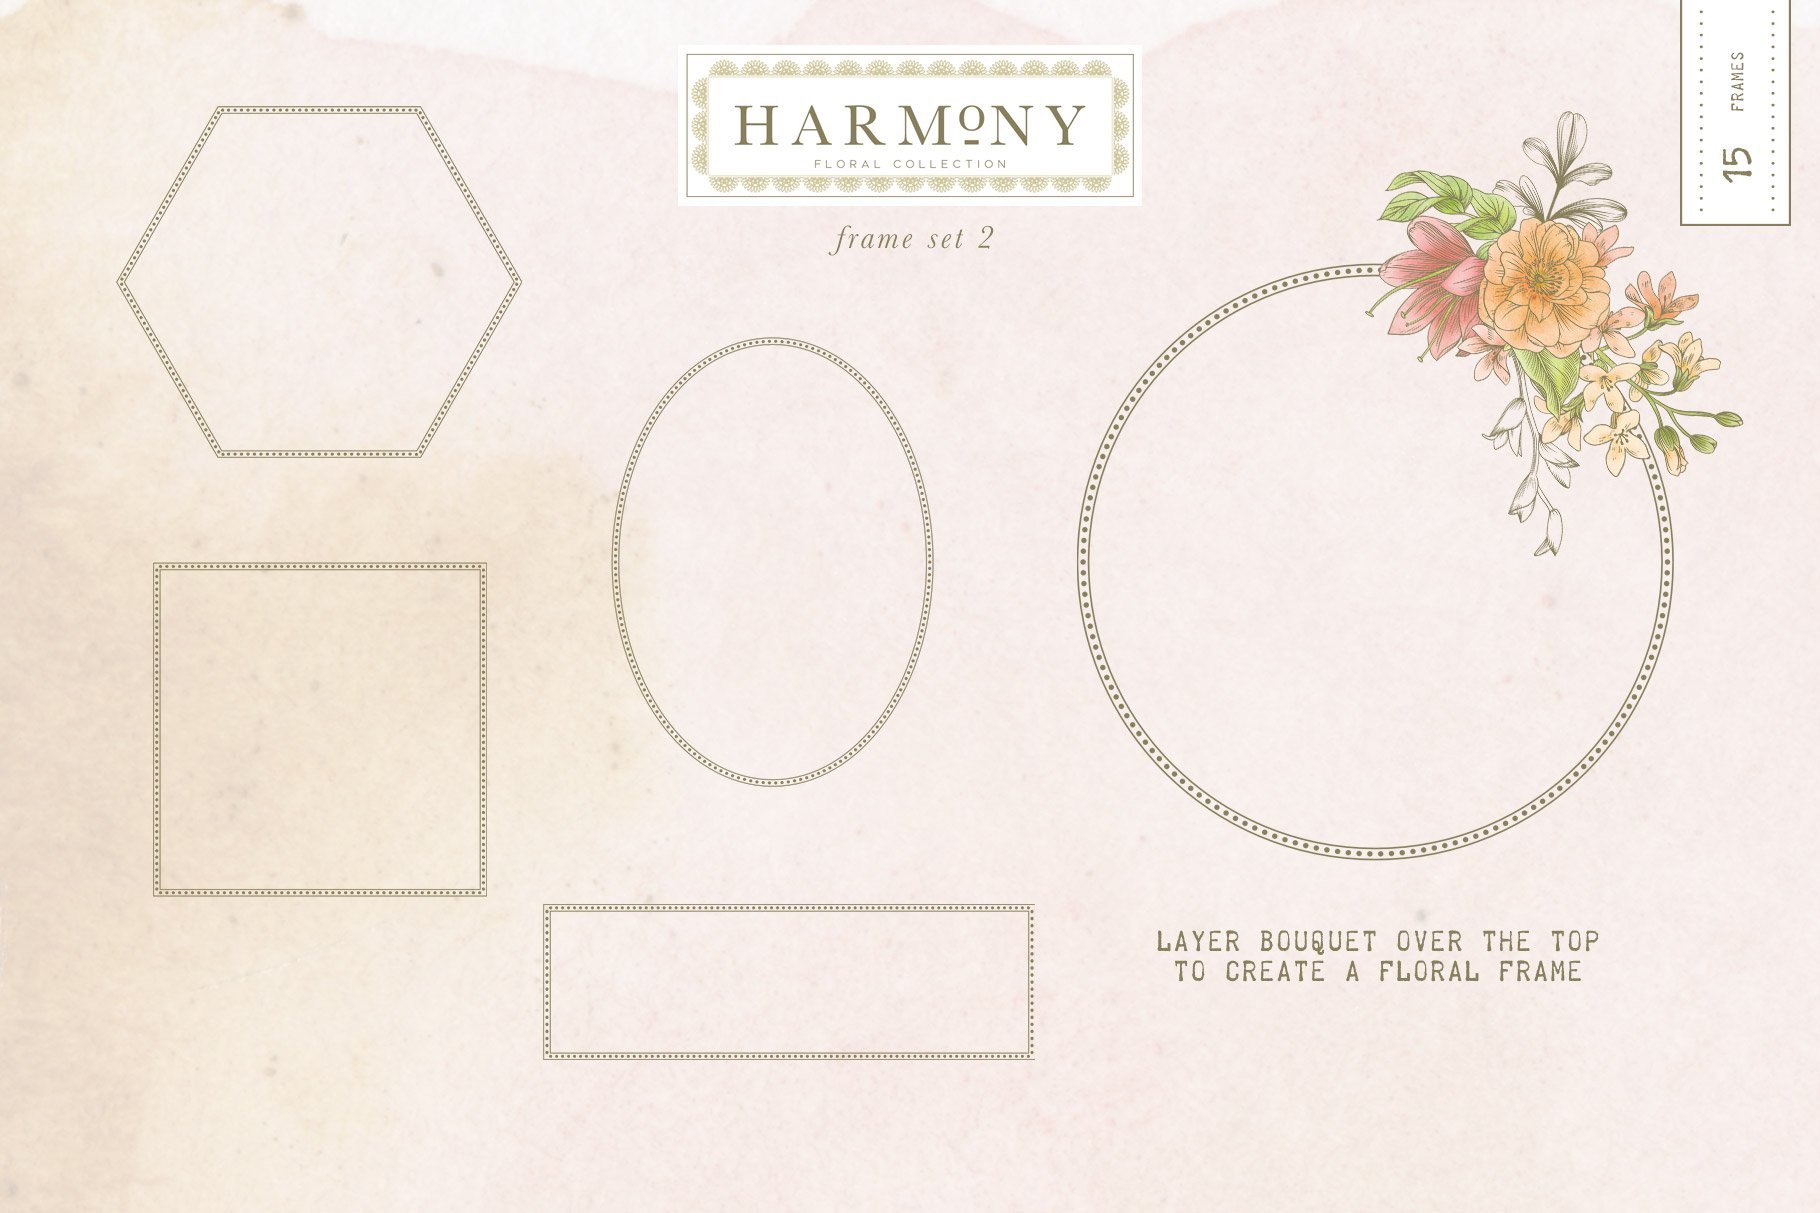 Harmony Floral Collection